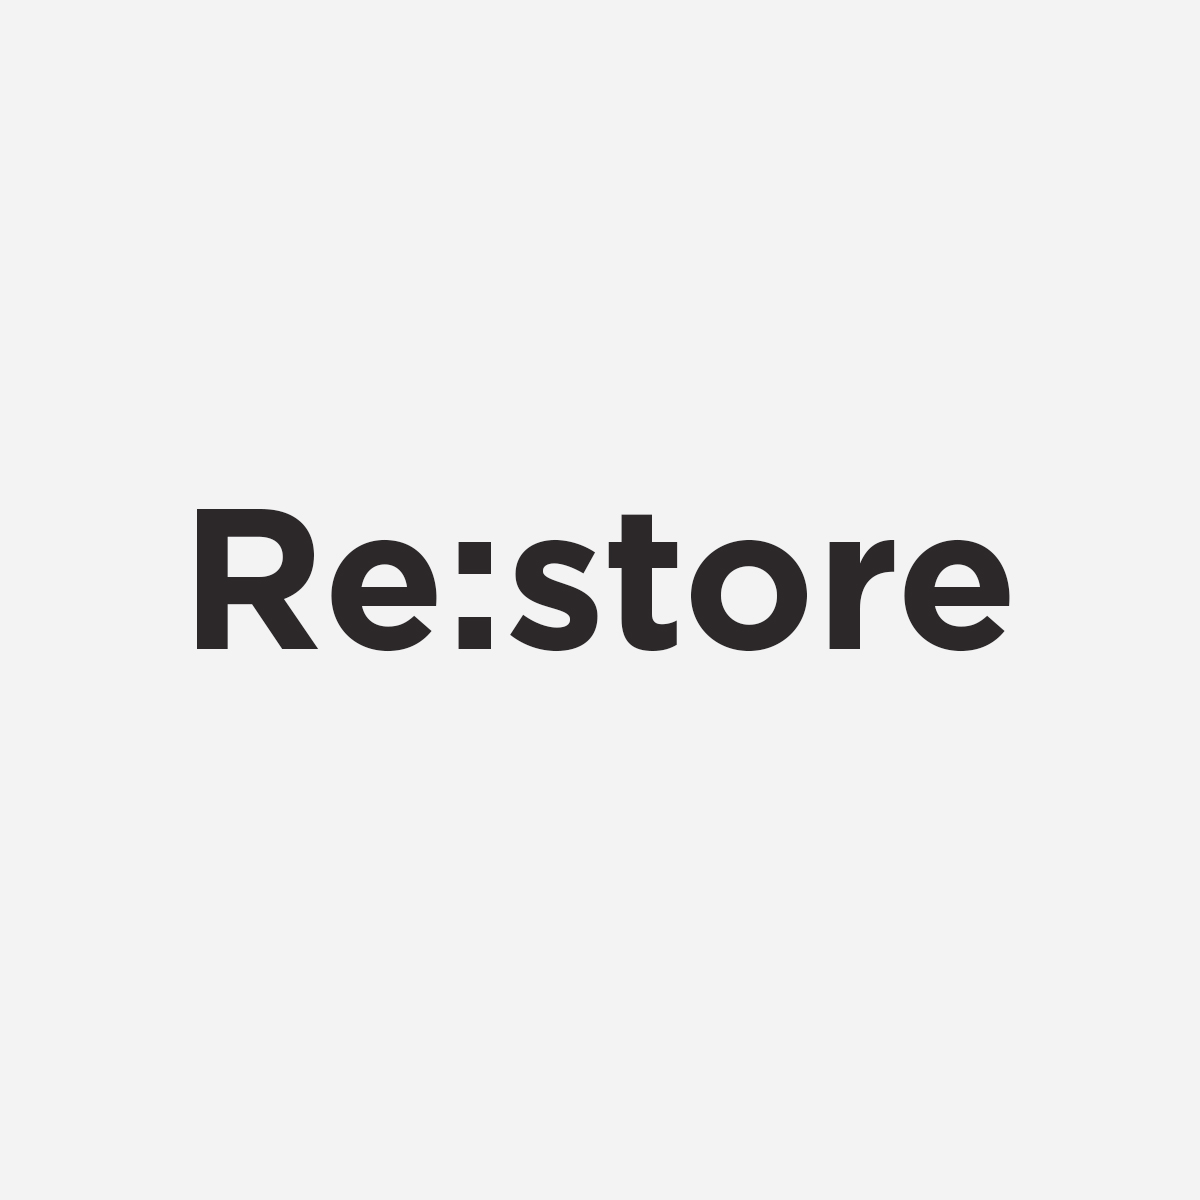 Re:Store